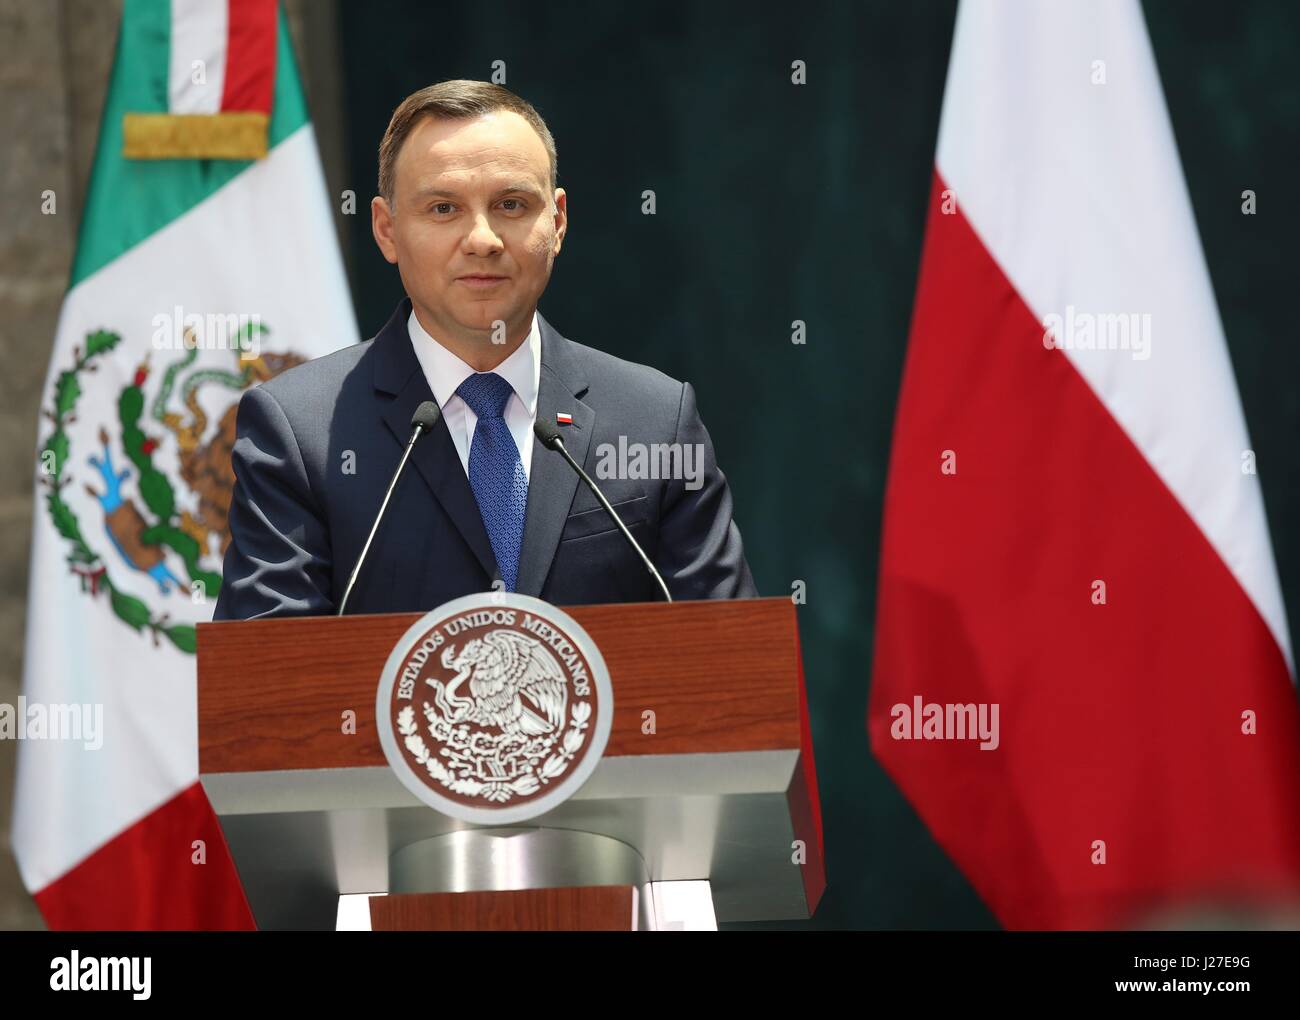 Polish President Andrzej Duda during a joint press conference with Mexican President Enrique Pena Nieto at the national palace April 24, 2017 in Mexico City, Mexico. Stock Photo